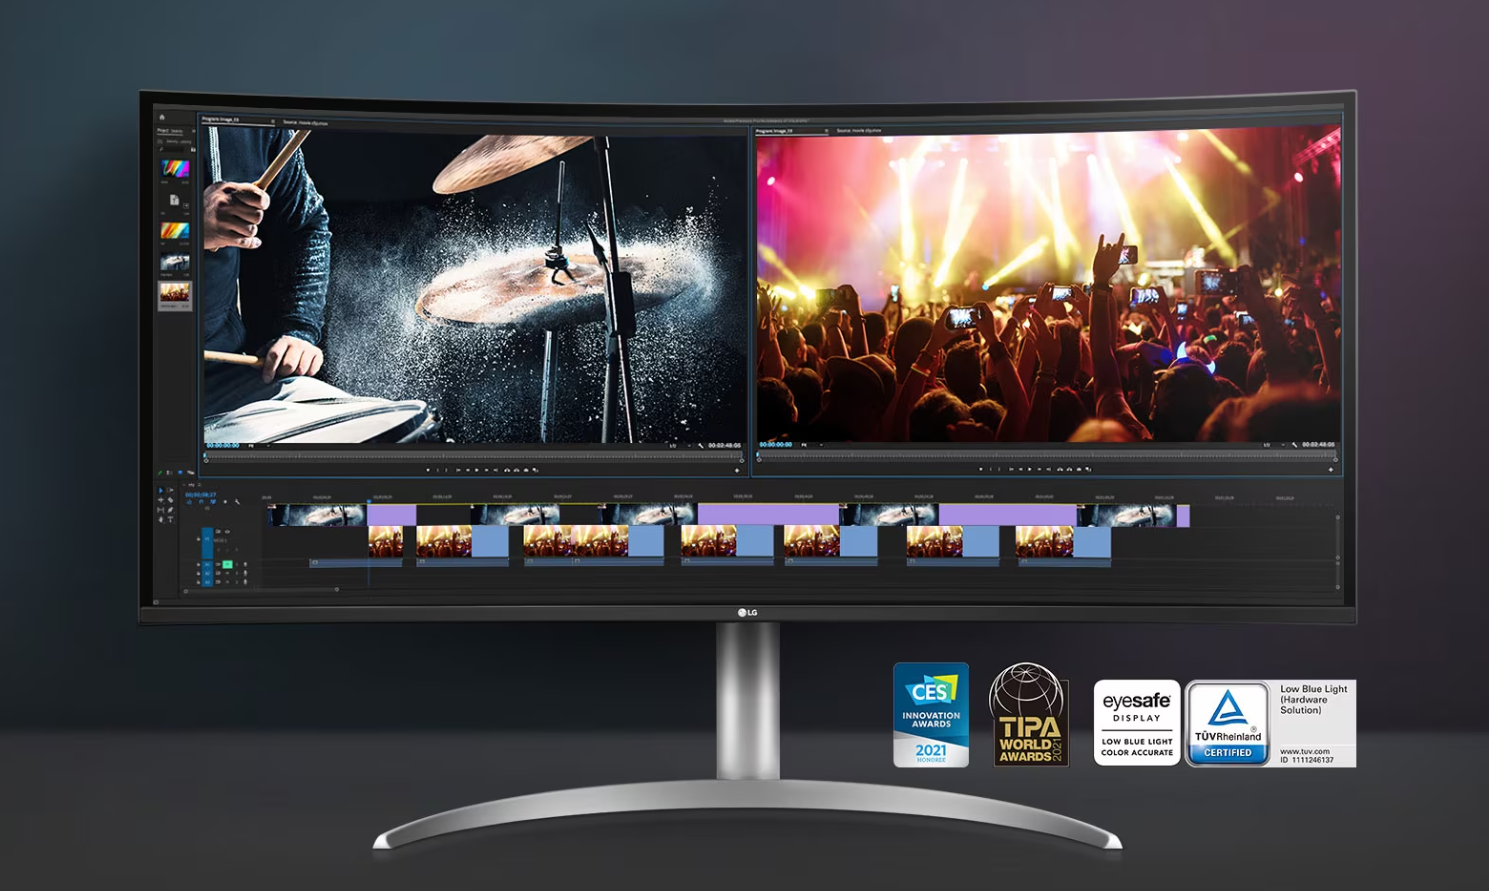 LG launches UltraWide 5K2K monitor with Nano IPS display and 72Hz refresh rate for €1339